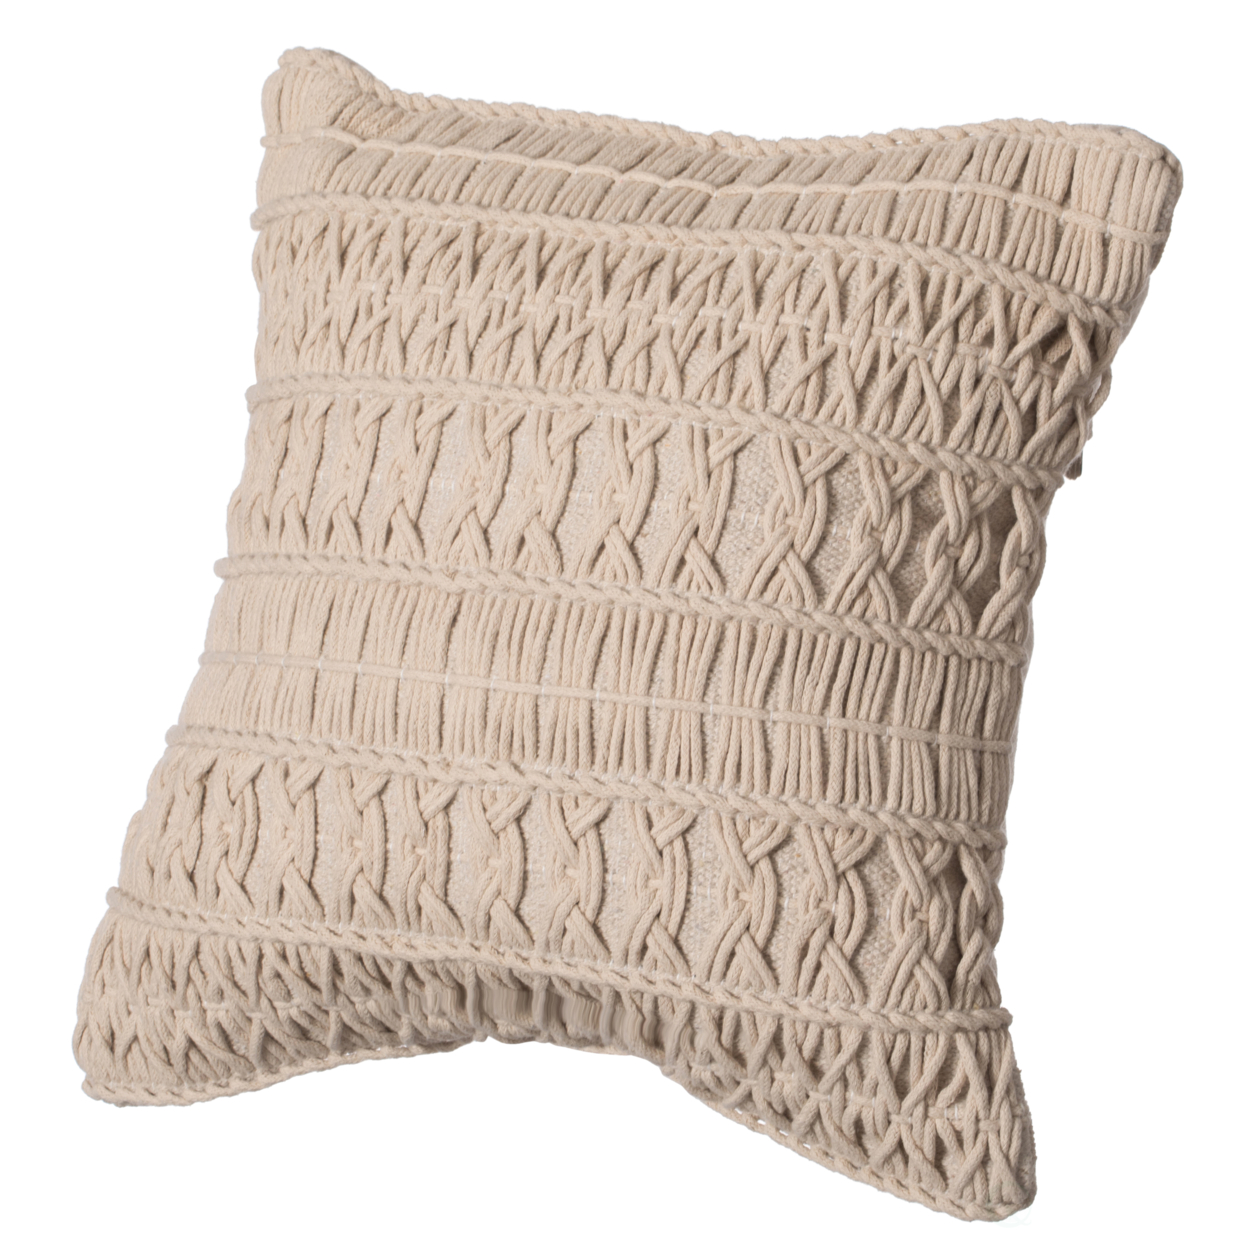 16 Handwoven Cotton Throw Pillow Cover With Layered Random String Pattern - Pillowcase With Cushion